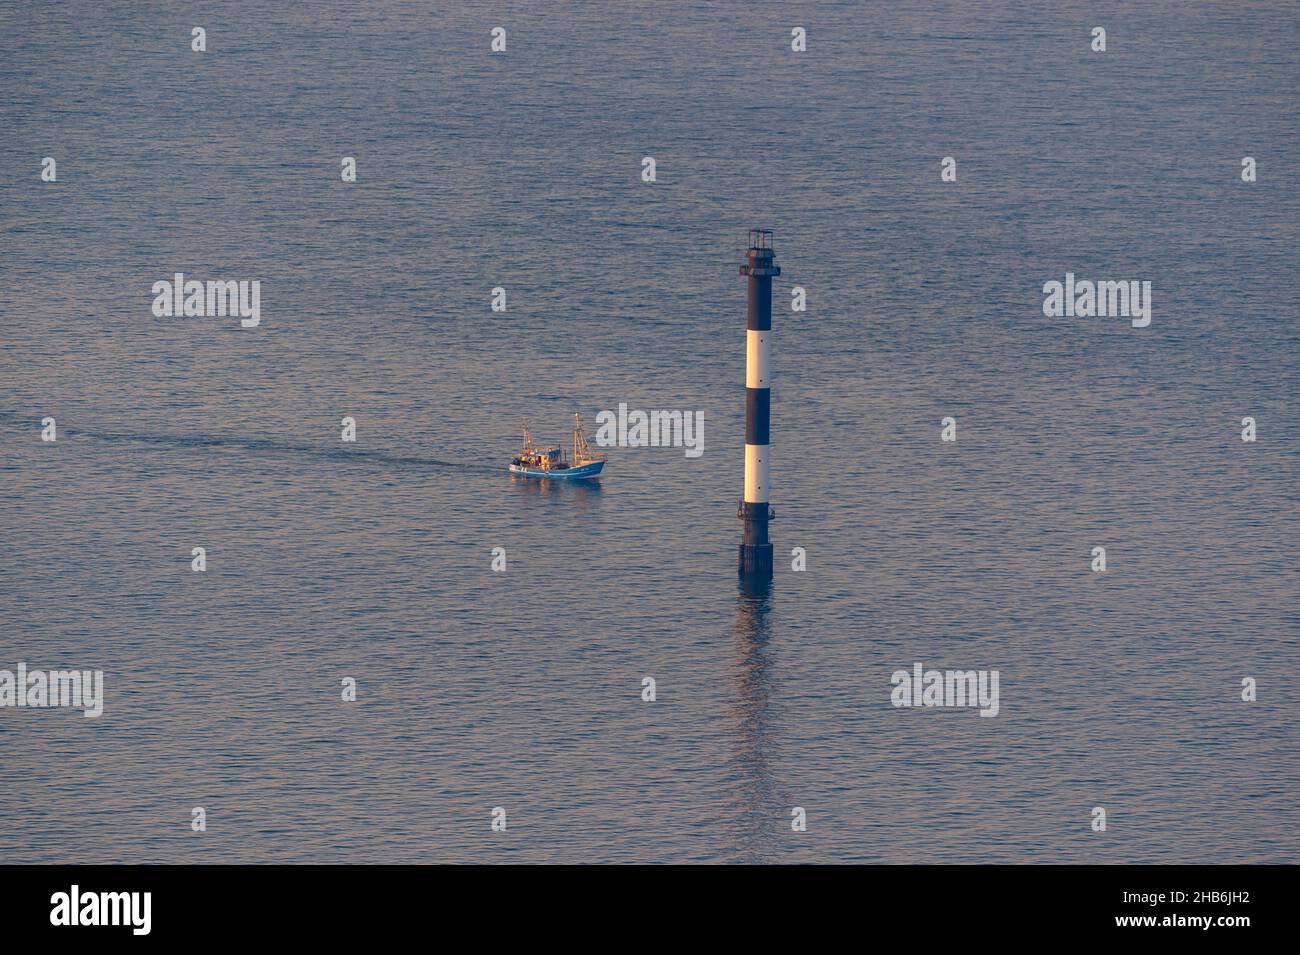 Fishing cutter passing a fairway marker on the North Sea in the area of the Elbe estuary, aerial photo, Germany, Lower Saxony, Cuxhaven Stock Photo